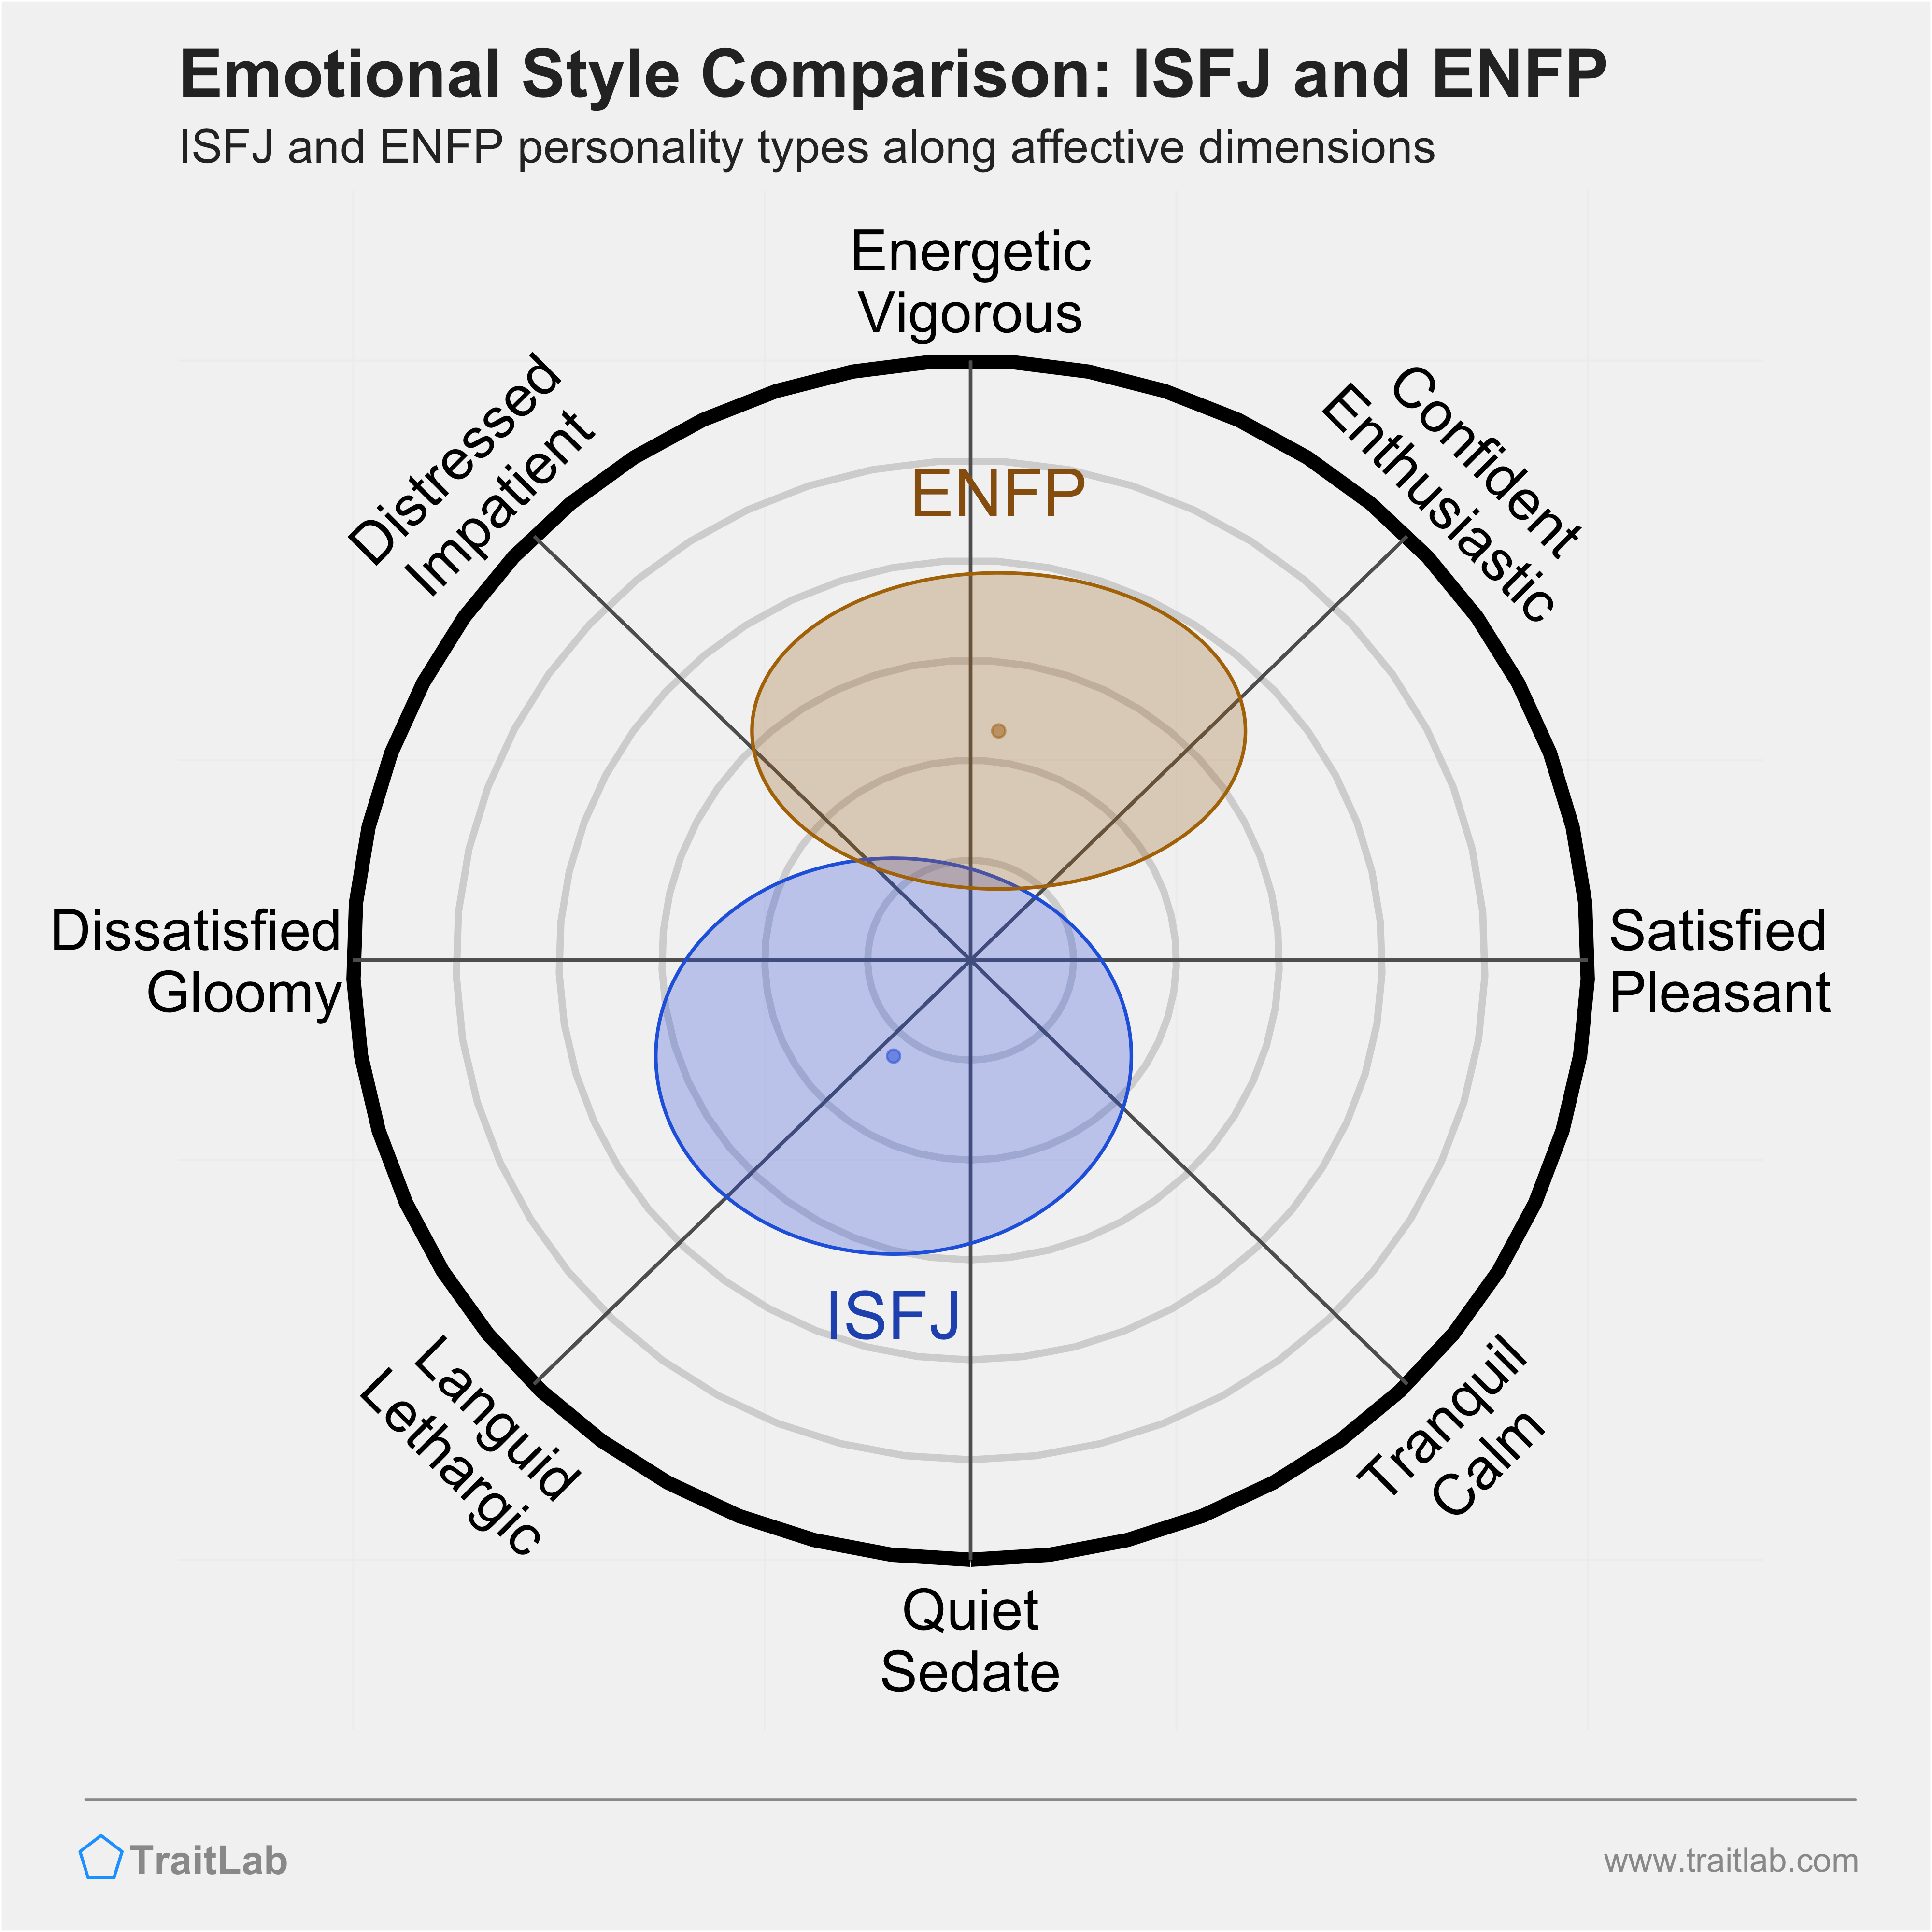 ISFJ and ENFP comparison across emotional (affective) dimensions